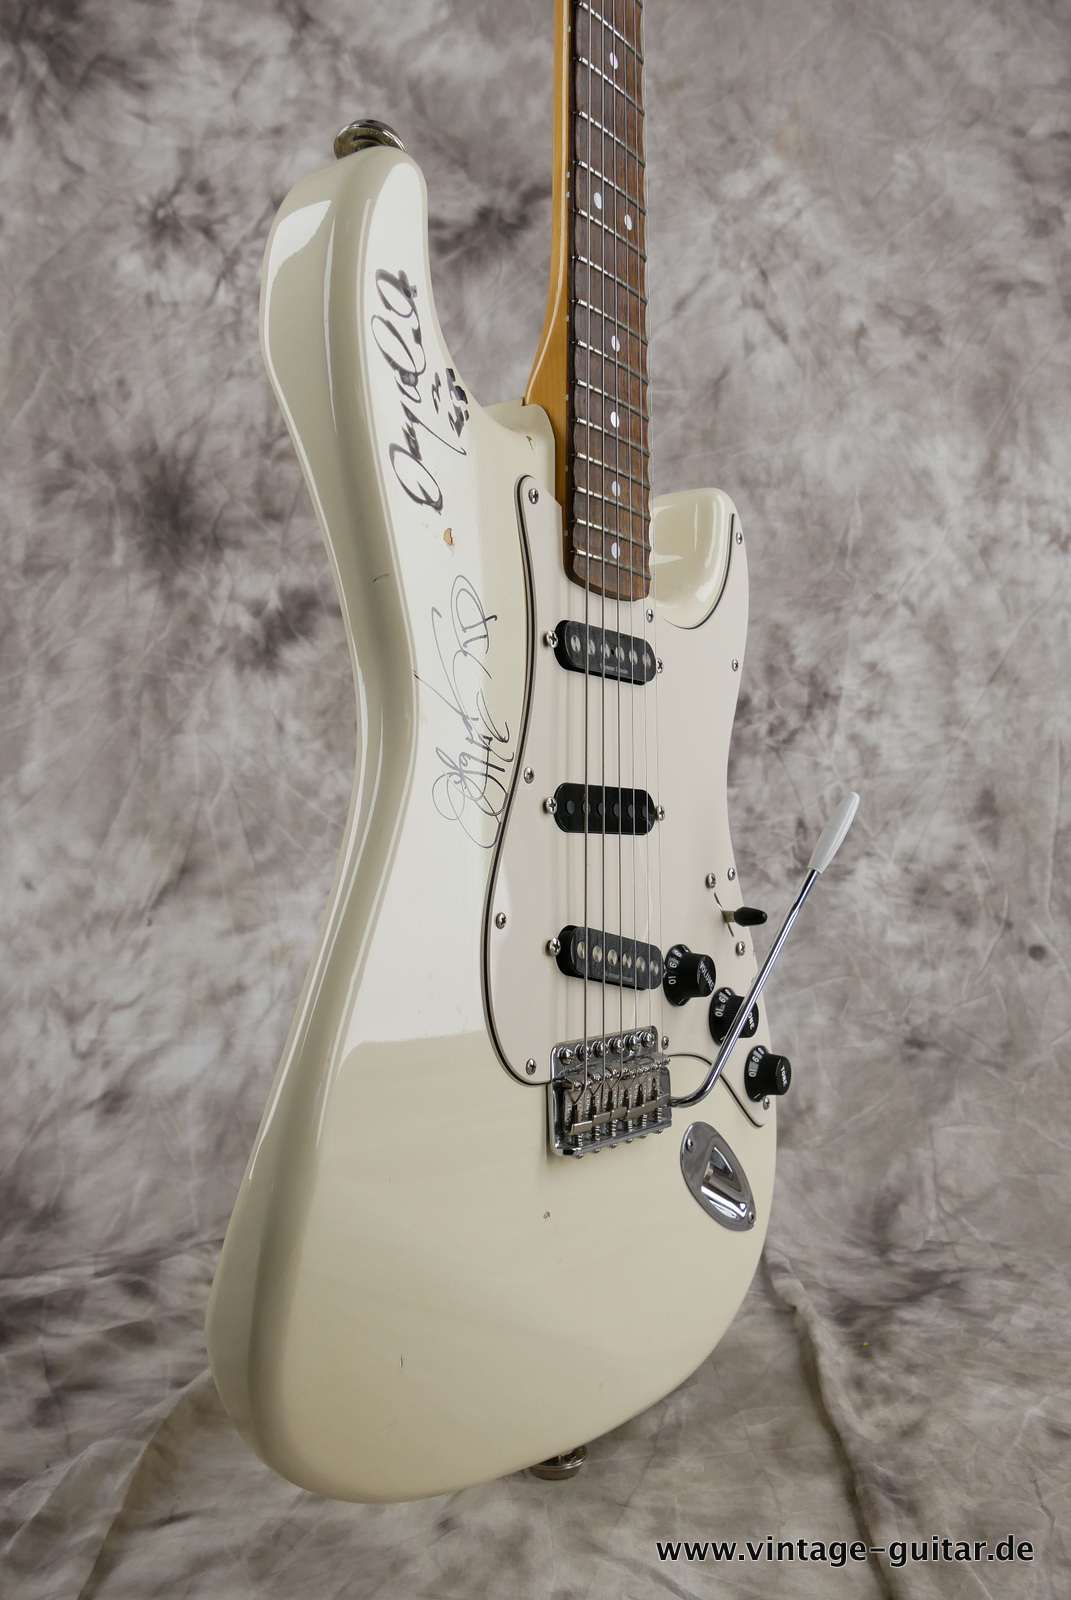 Fender_Strat_Stratocaster_Ritchie_Blackmore_ST-72RB_madeinjapan_1997_olympic_white_singed_scalloped_fretboard-005.JPG